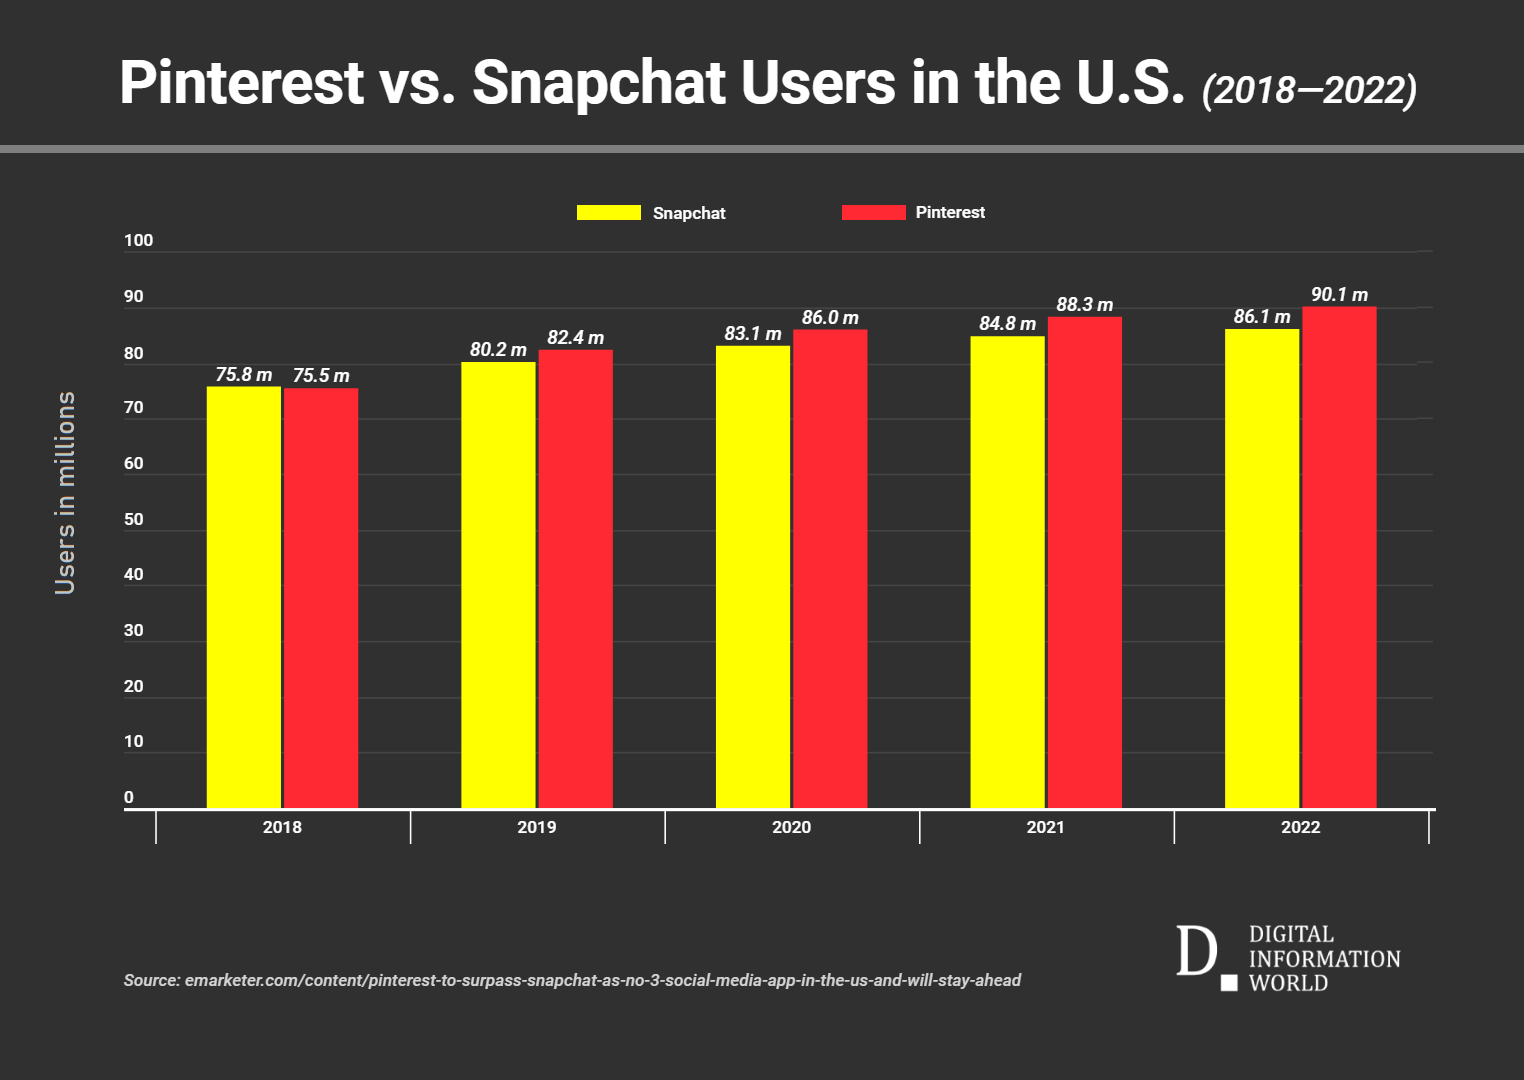 Pinterest Surpassed Snapchat as Number 3 Social Media App in the US in terms of users and Will Stay Ahead